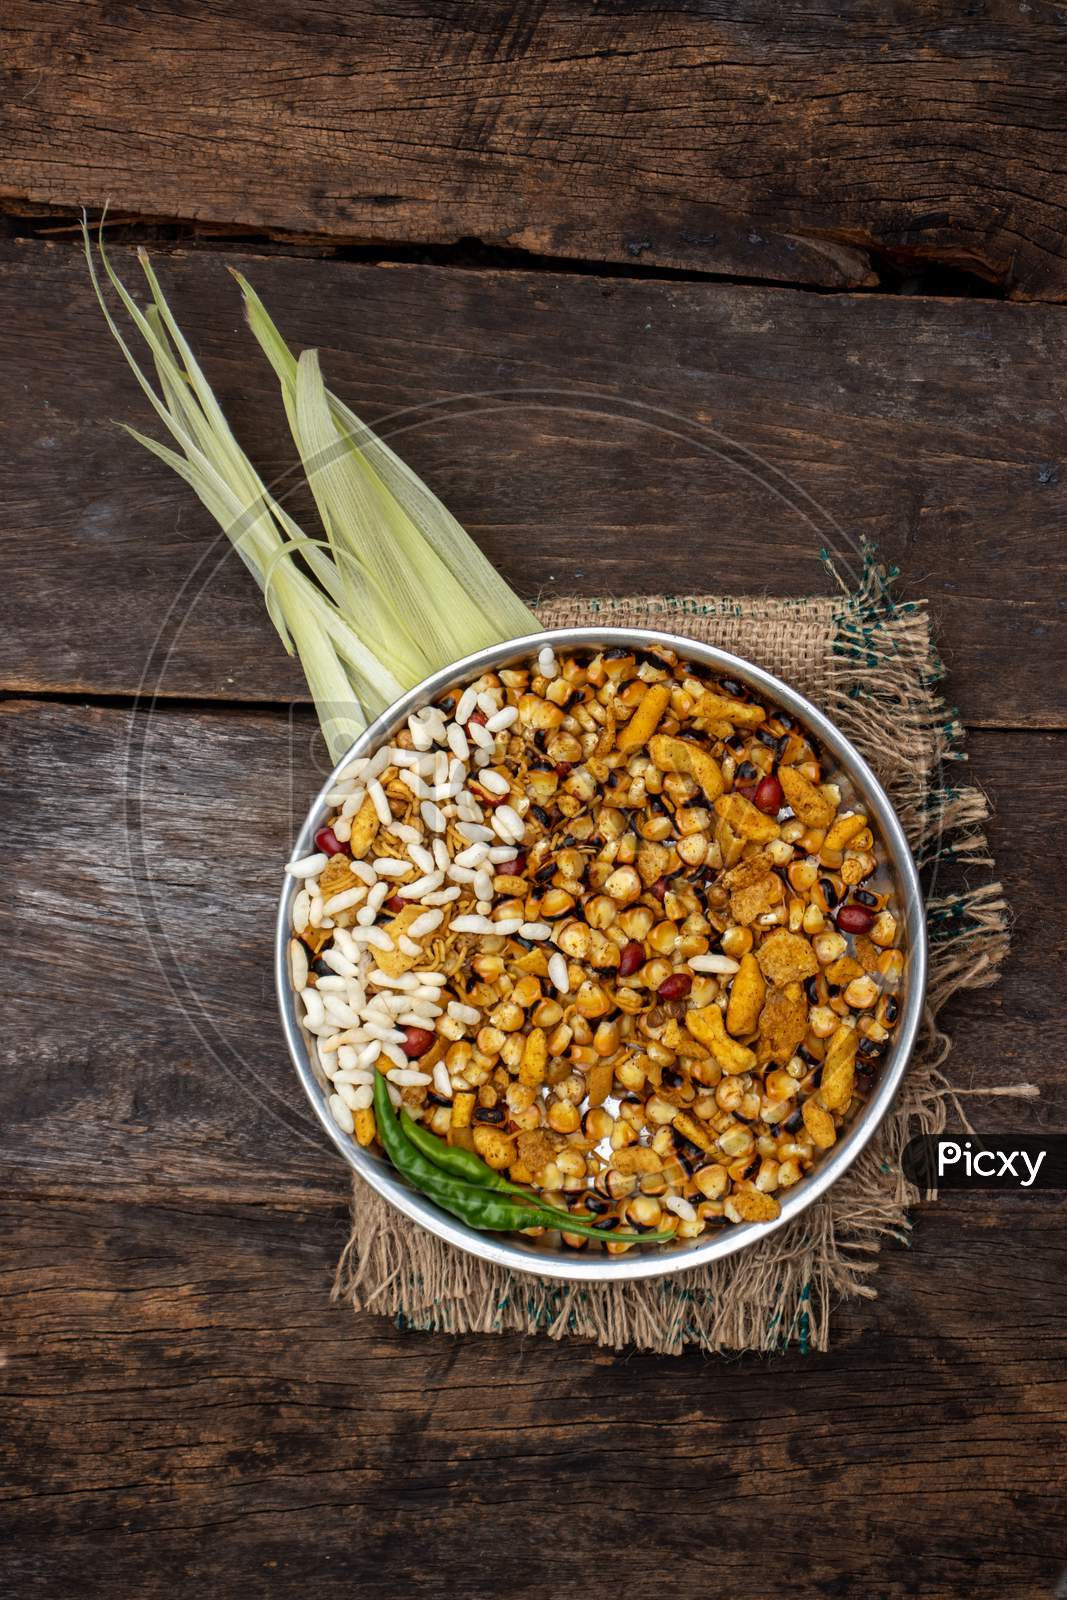 Roasted Corn Seeds And Puffed Rice With Namkeen And Spices In A Plate Isolated On Wooden Background